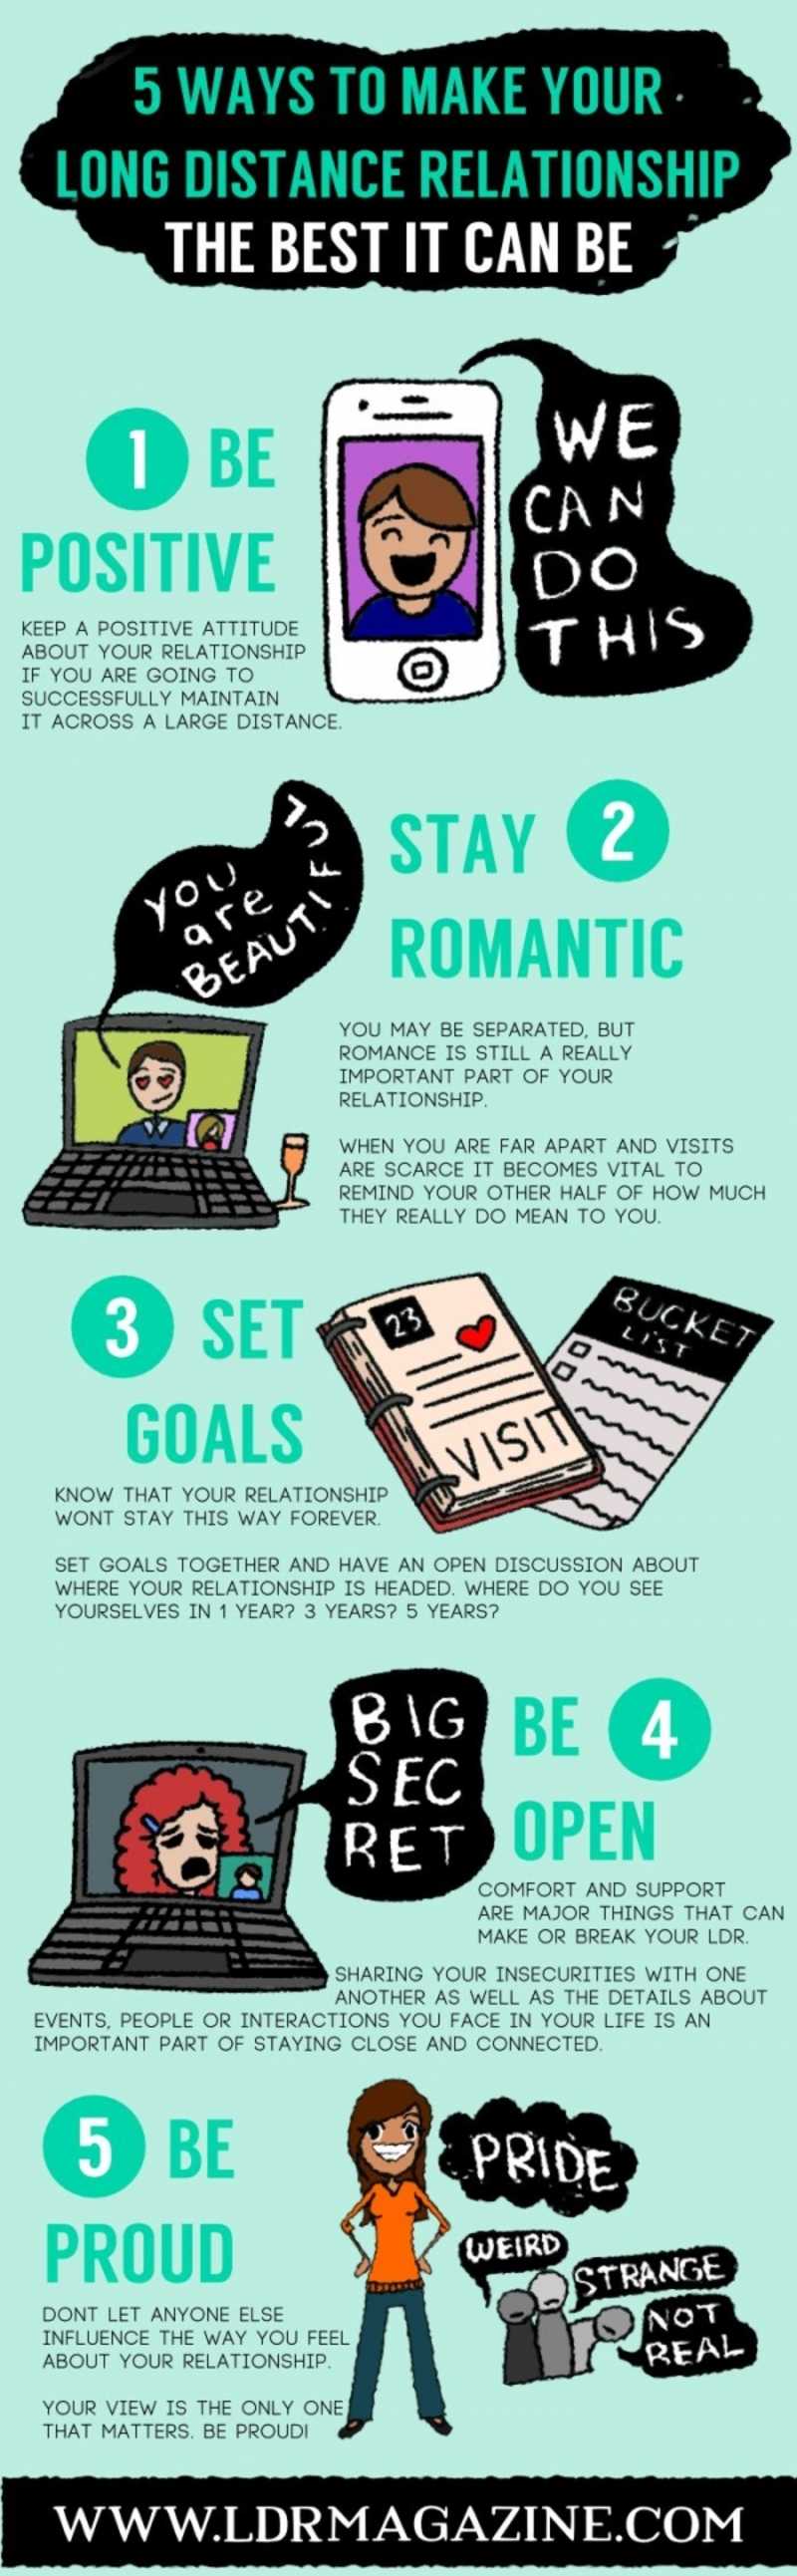 5 Ways To Make Your LDR The Best It Can Be